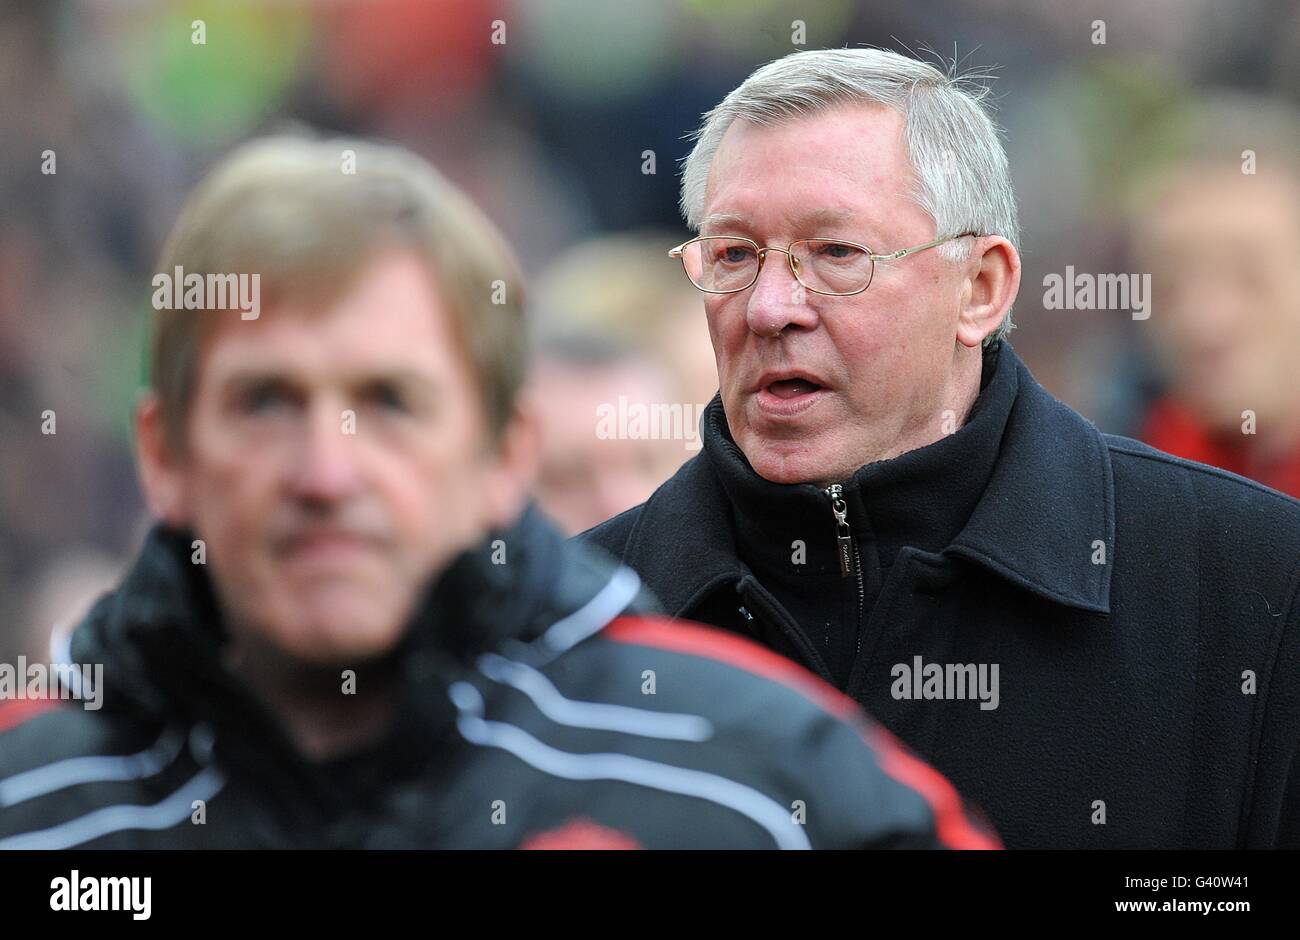 Liverpool manager Kenny Dalglish (left) and Manchester United manager Alex Ferguson (right) make their way towards pitchside before the match Stock Photo